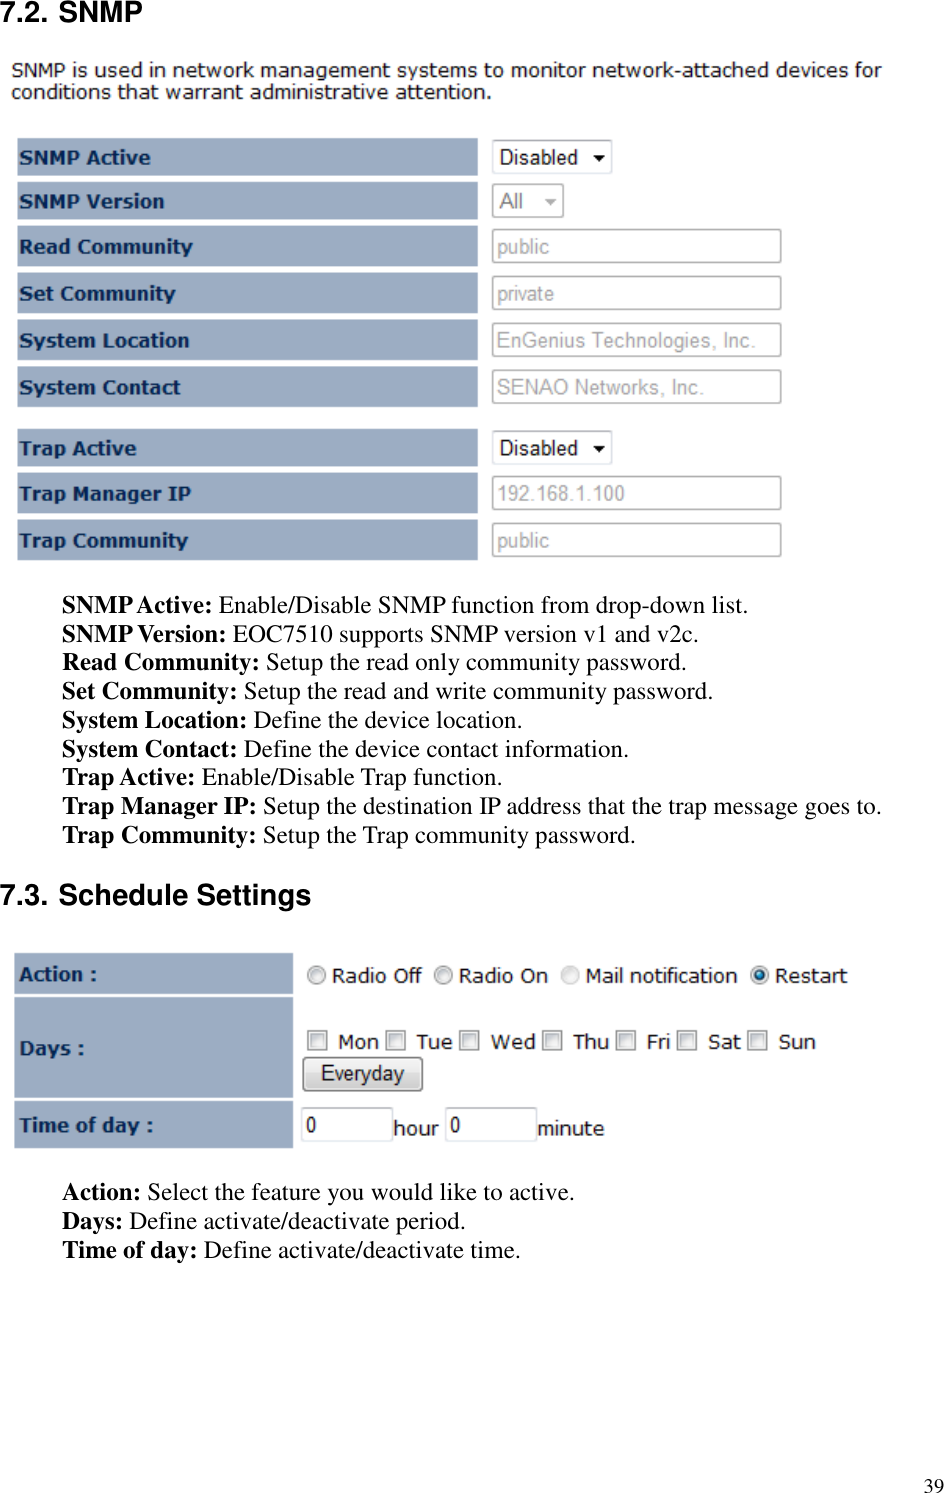   39 7.2. SNMP   SNMP Active: Enable/Disable SNMP function from drop-down list. SNMP Version: EOC7510 supports SNMP version v1 and v2c. Read Community: Setup the read only community password. Set Community: Setup the read and write community password. System Location: Define the device location. System Contact: Define the device contact information. Trap Active: Enable/Disable Trap function. Trap Manager IP: Setup the destination IP address that the trap message goes to. Trap Community: Setup the Trap community password.  7.3. Schedule Settings   Action: Select the feature you would like to active. Days: Define activate/deactivate period. Time of day: Define activate/deactivate time.       